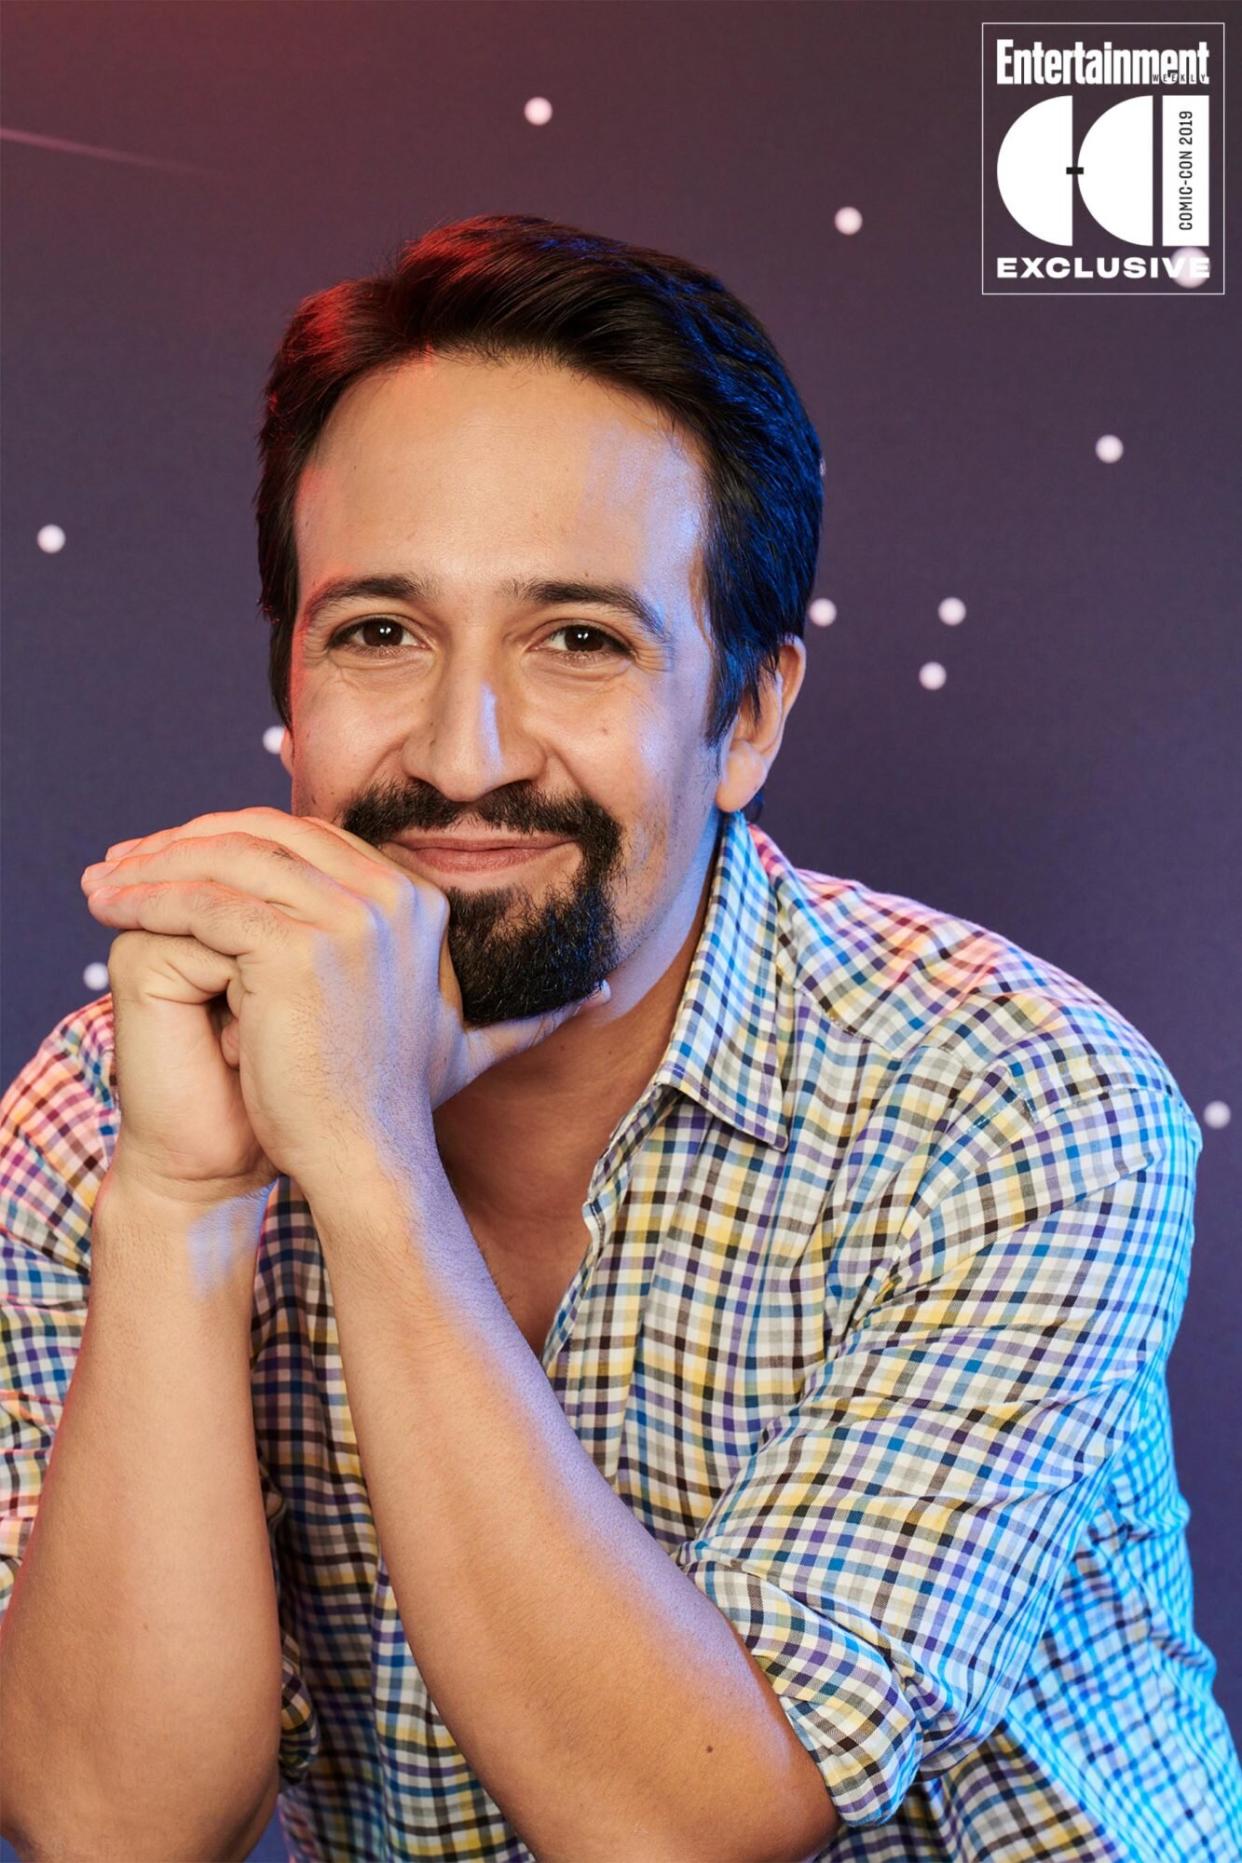 Day 1 - 2019 SDCC - San Diego Comic-con Lin-Manuel Miranda photographed in the Entertainment Weekly portrait studio during the 2019 San Diego Comic Con on July 18th, 2019 in San Diego, California. Photographed by: Eric Ray Davison Pictured: Lin-Manuel Miranda Film/Show: His Dark Materials